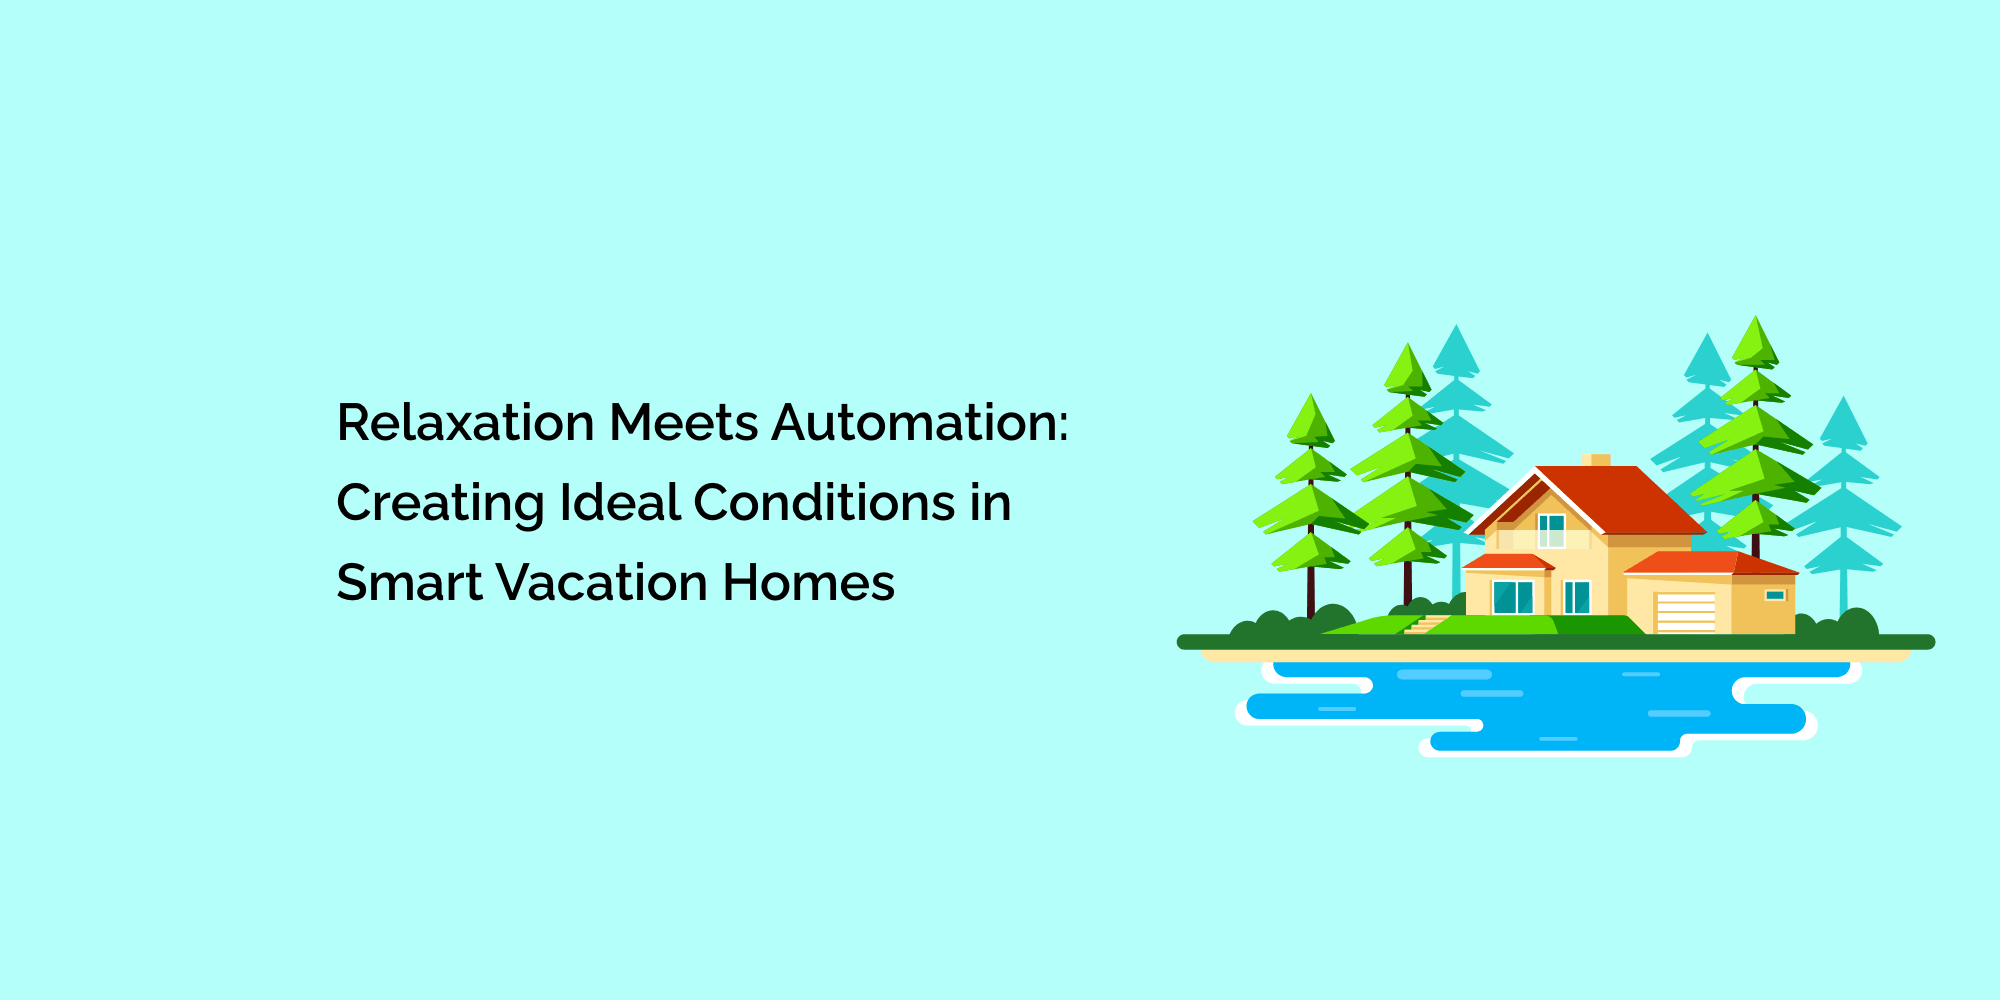 Relaxation Meets Automation: Creating Ideal Conditions in Smart Vacation Homes